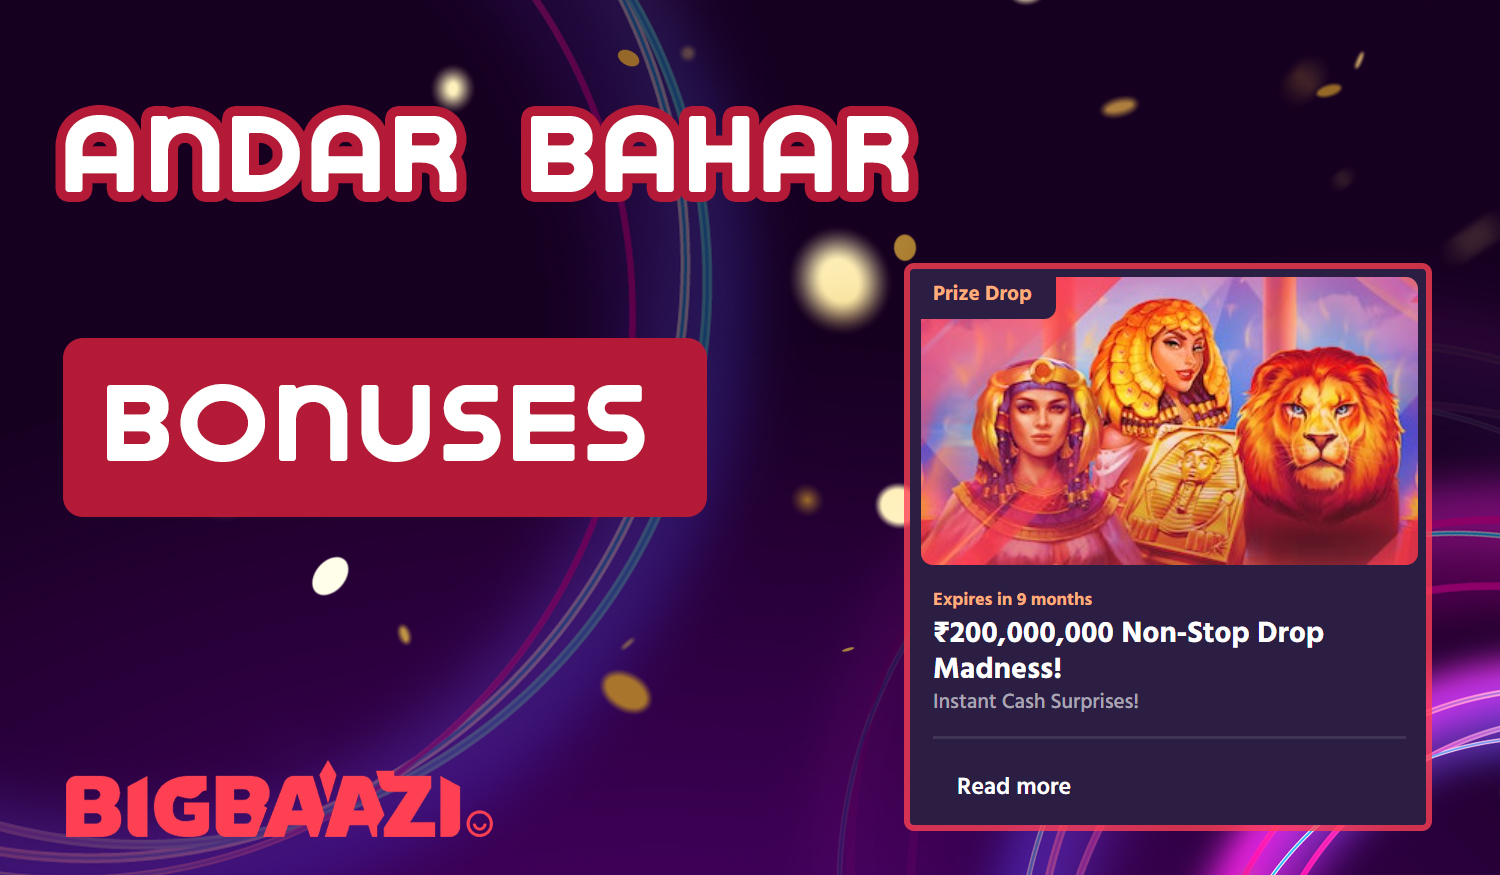 What bonuses Big Baazi online casino offers to fans of the game Andar Bahar